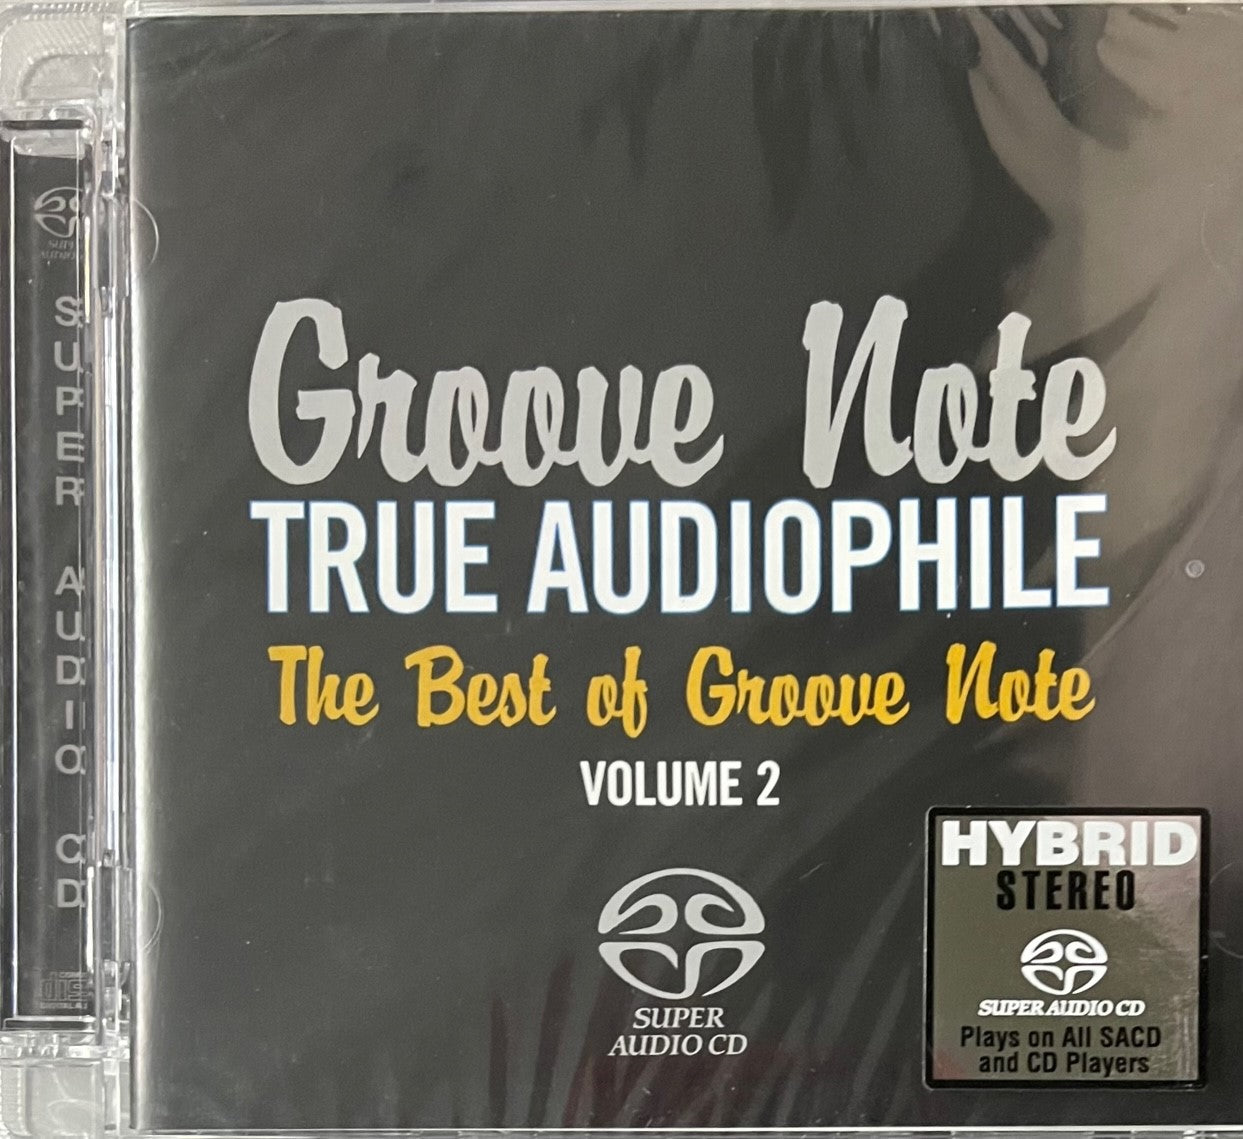 THE BEST OF GROOVE NOTE VOL 2 - VARIOUS ARTISTS (SACD)